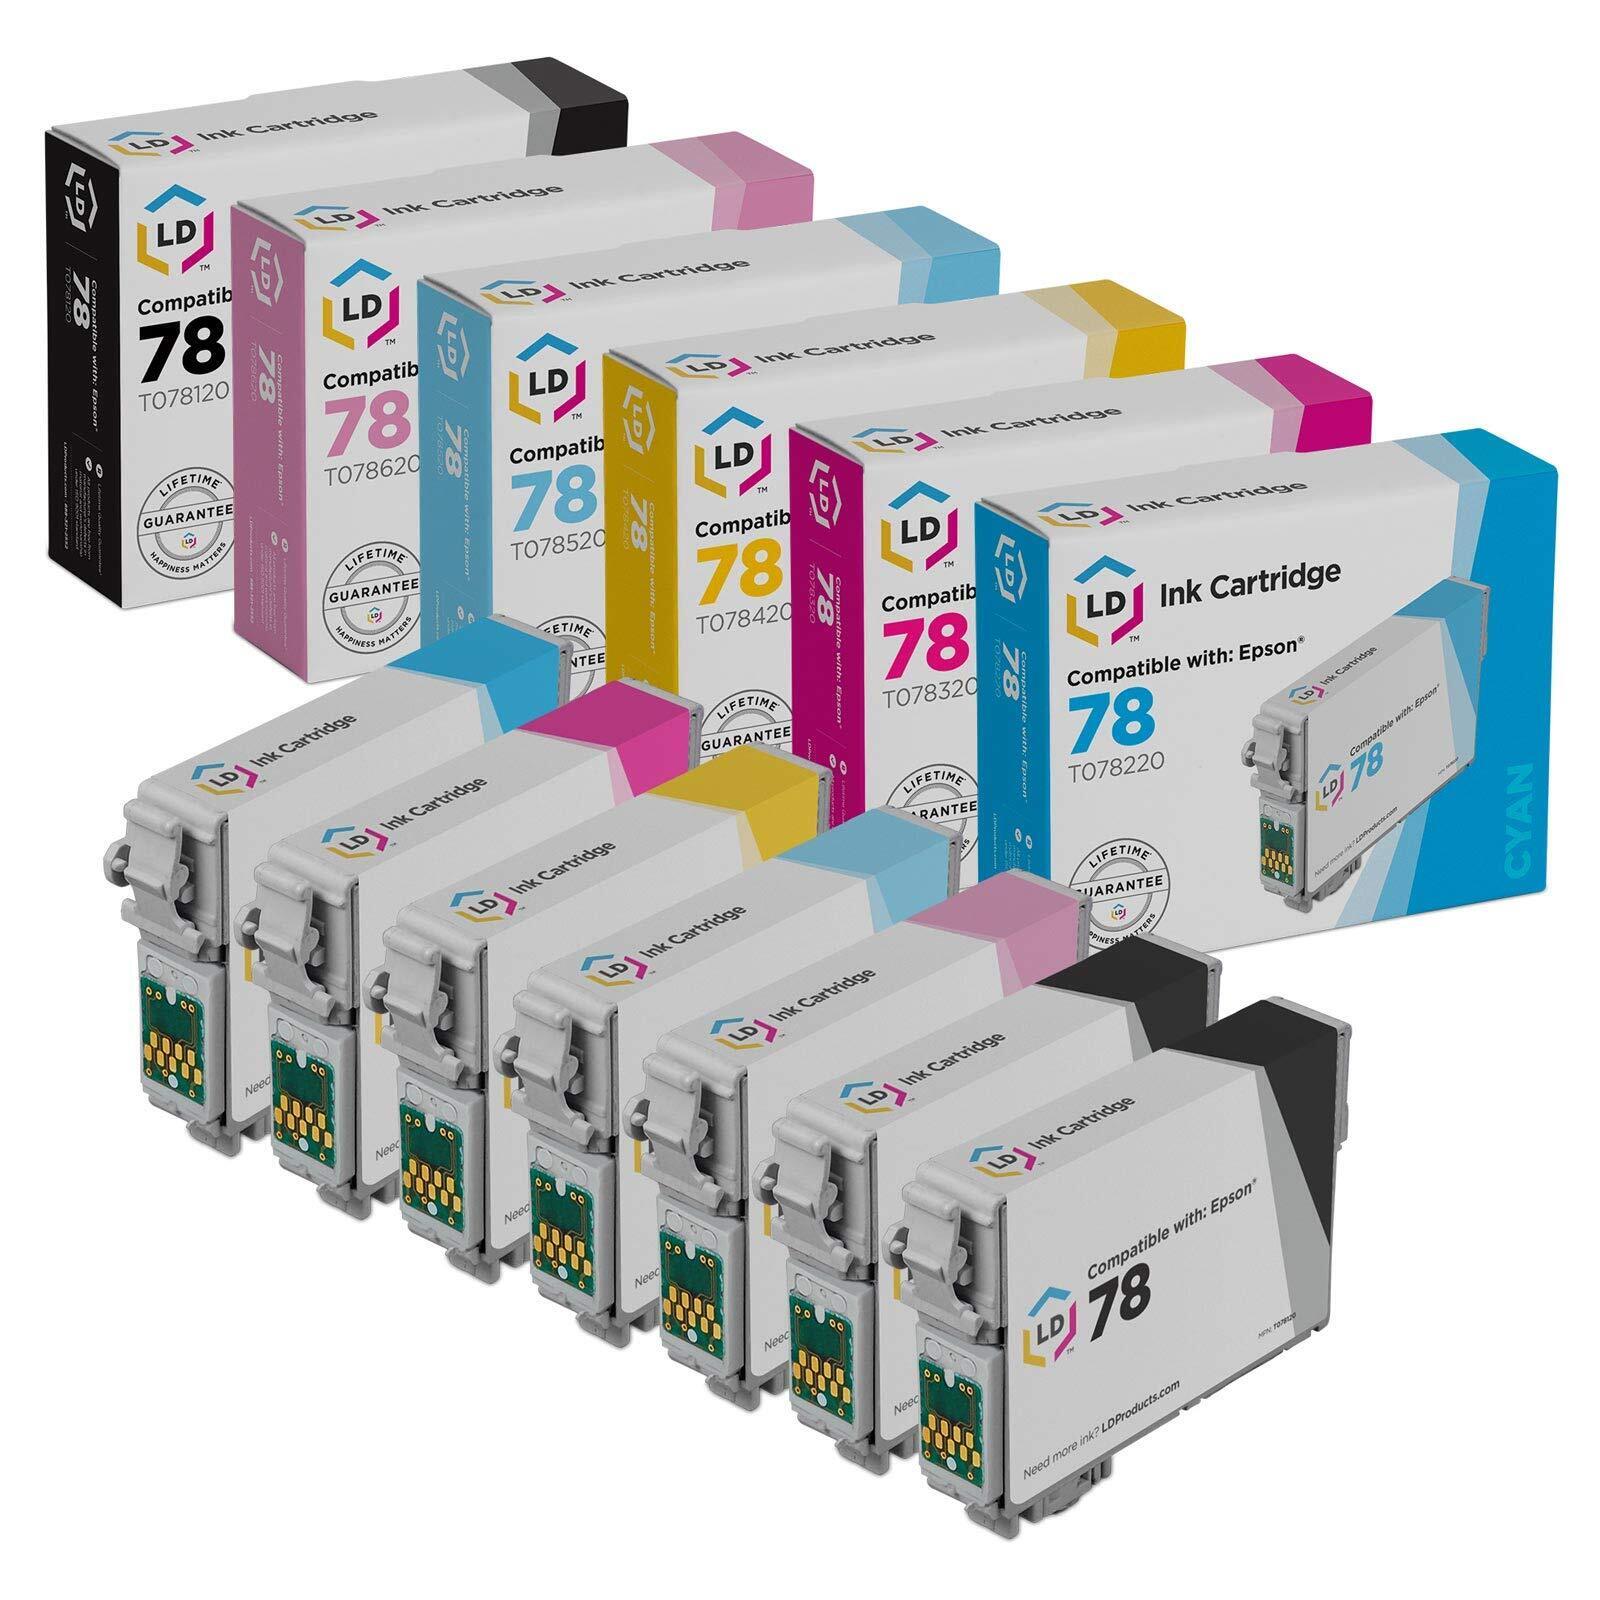 LD T078 Black and Color Ink Cartridges Set of 7 for Epson T078 #78  RX580 RX595